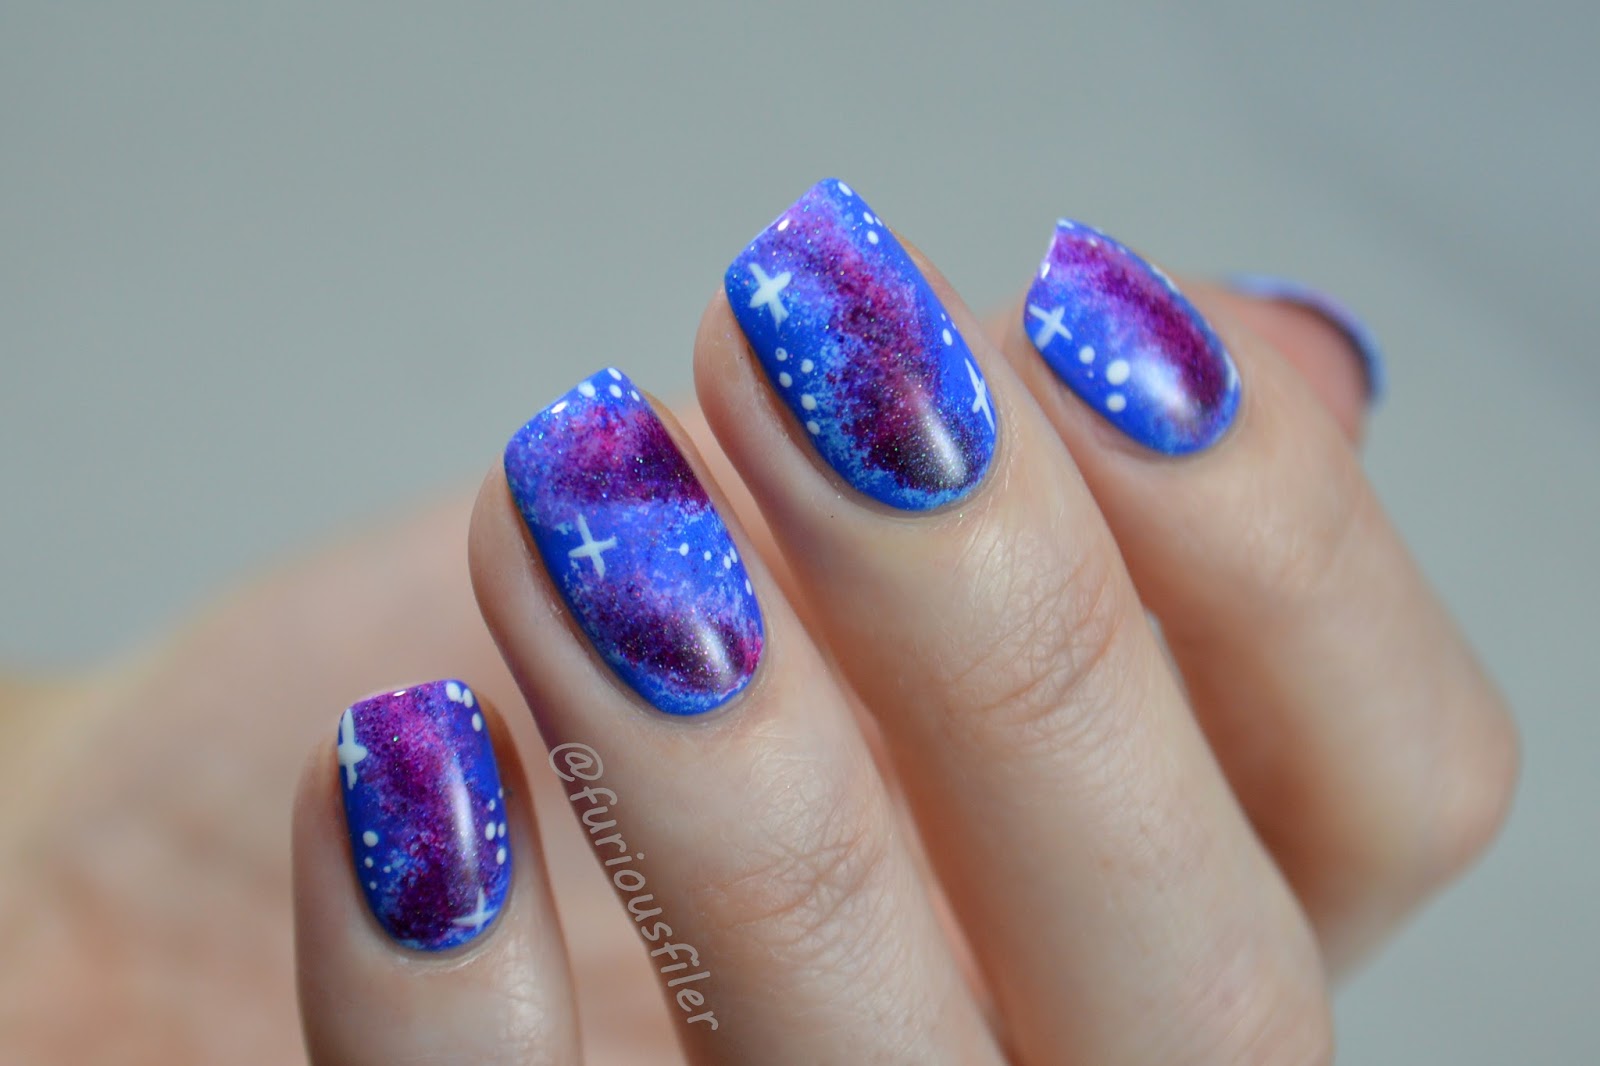 9. How to Create a Galaxy Nail Art Design with a Sponge - wide 4